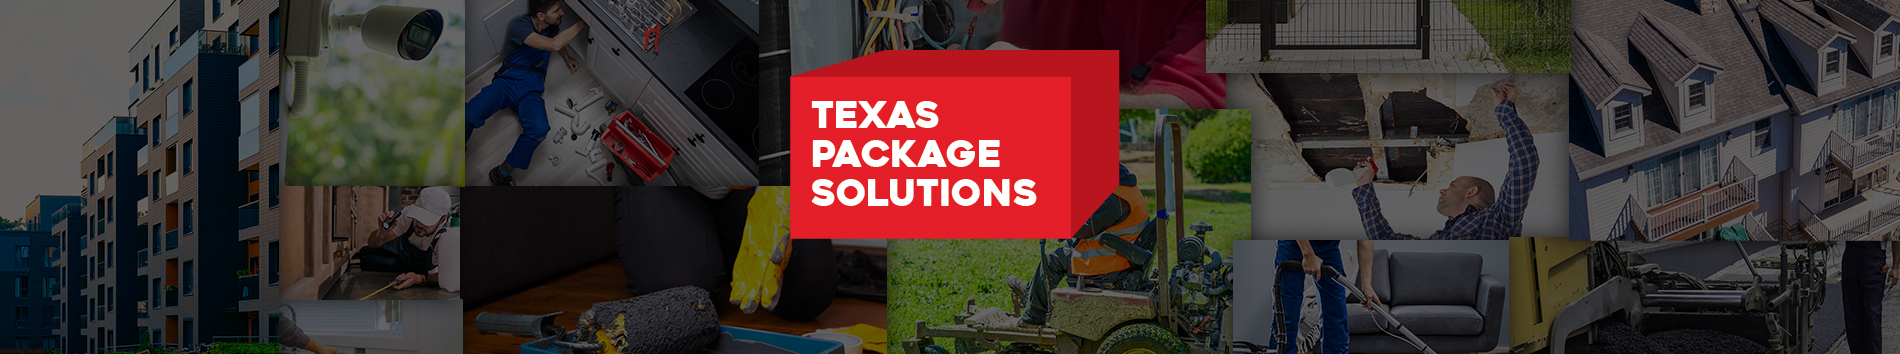 Texas Package Solutions